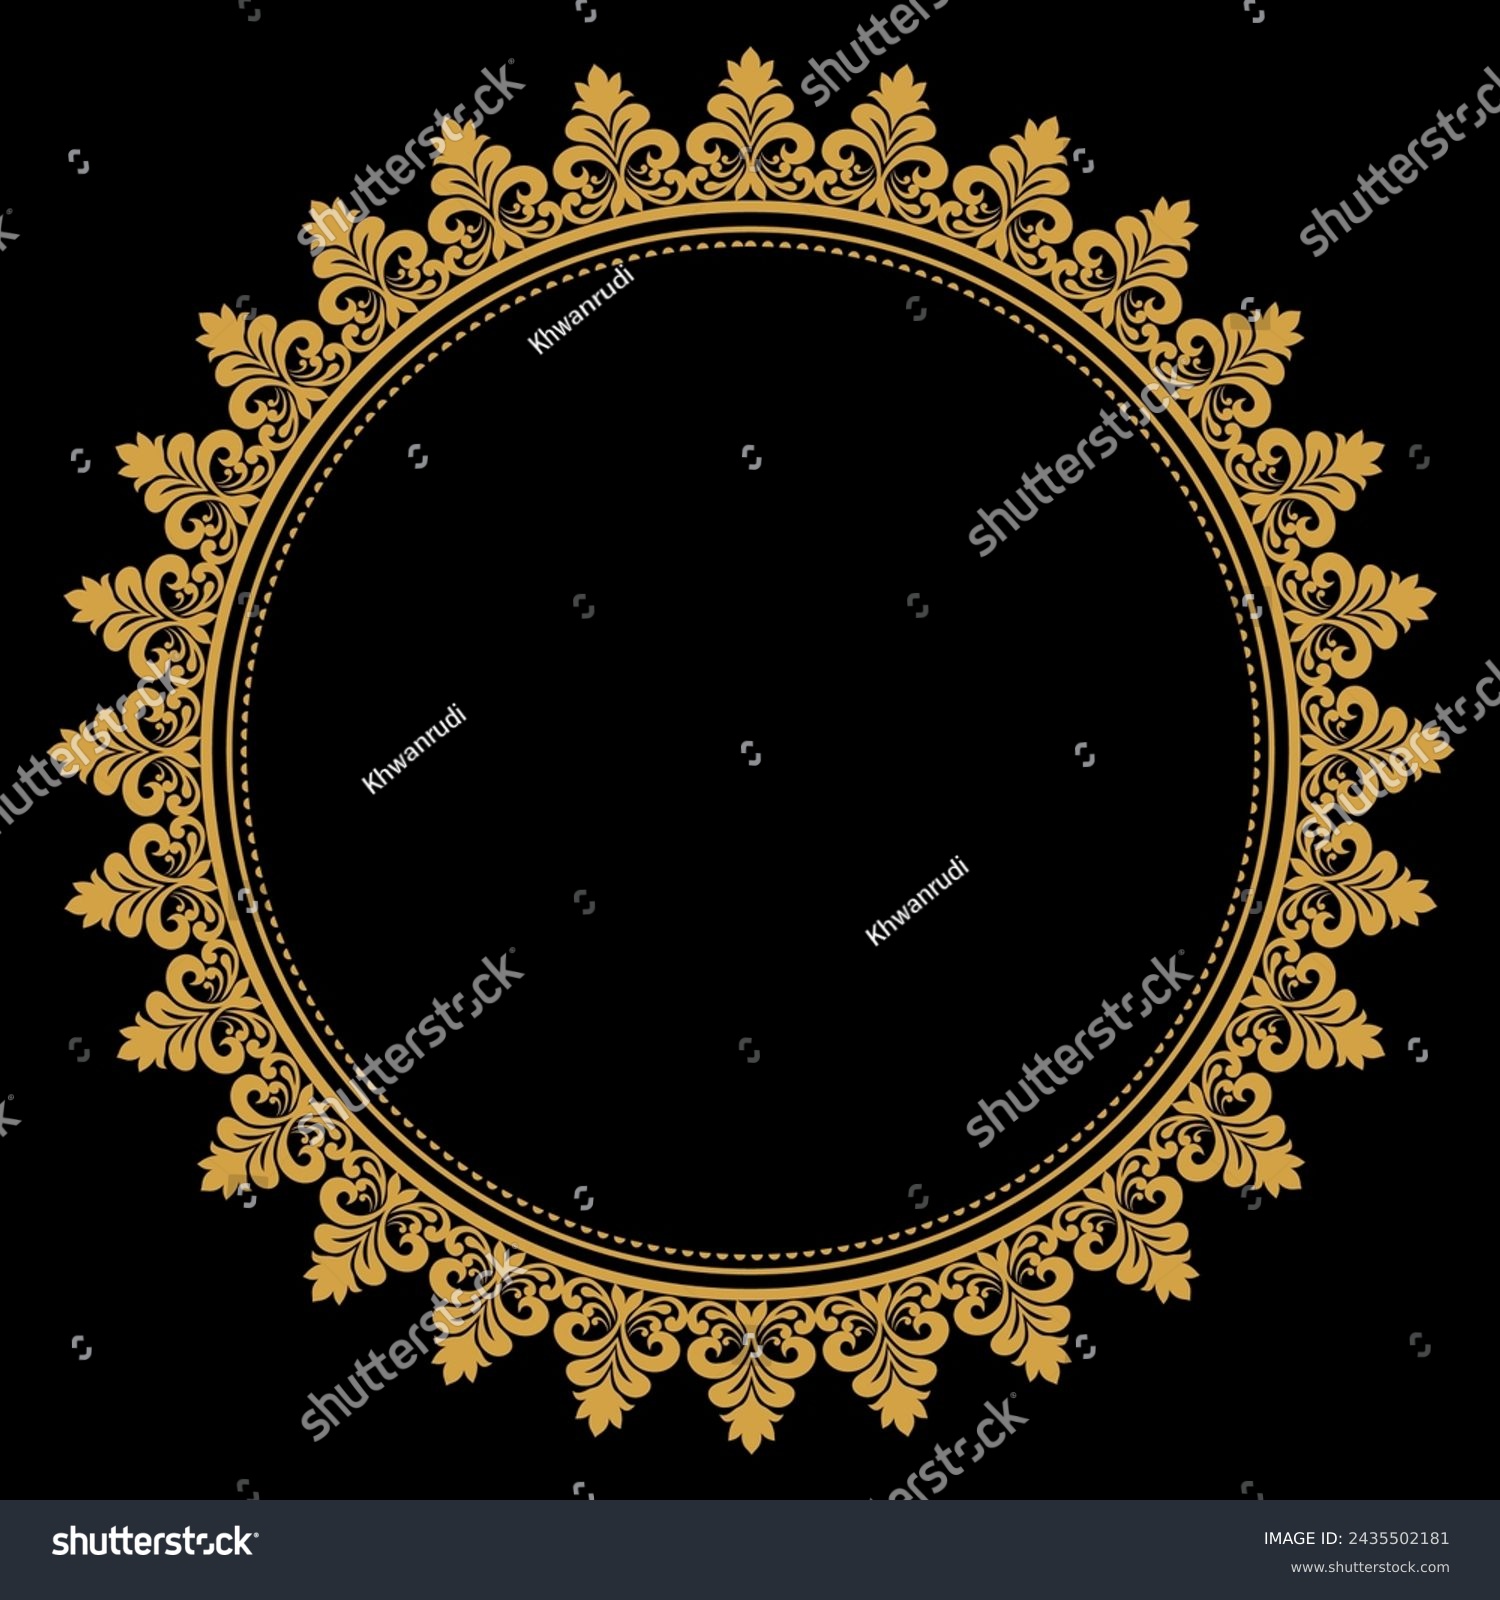 SVG of Luxury gold circle flourish frame with baroque style details, Vintage Golden Circular Round, perfect for wedding invitations and vintage card design, floral flower elements, Vector illustration svg